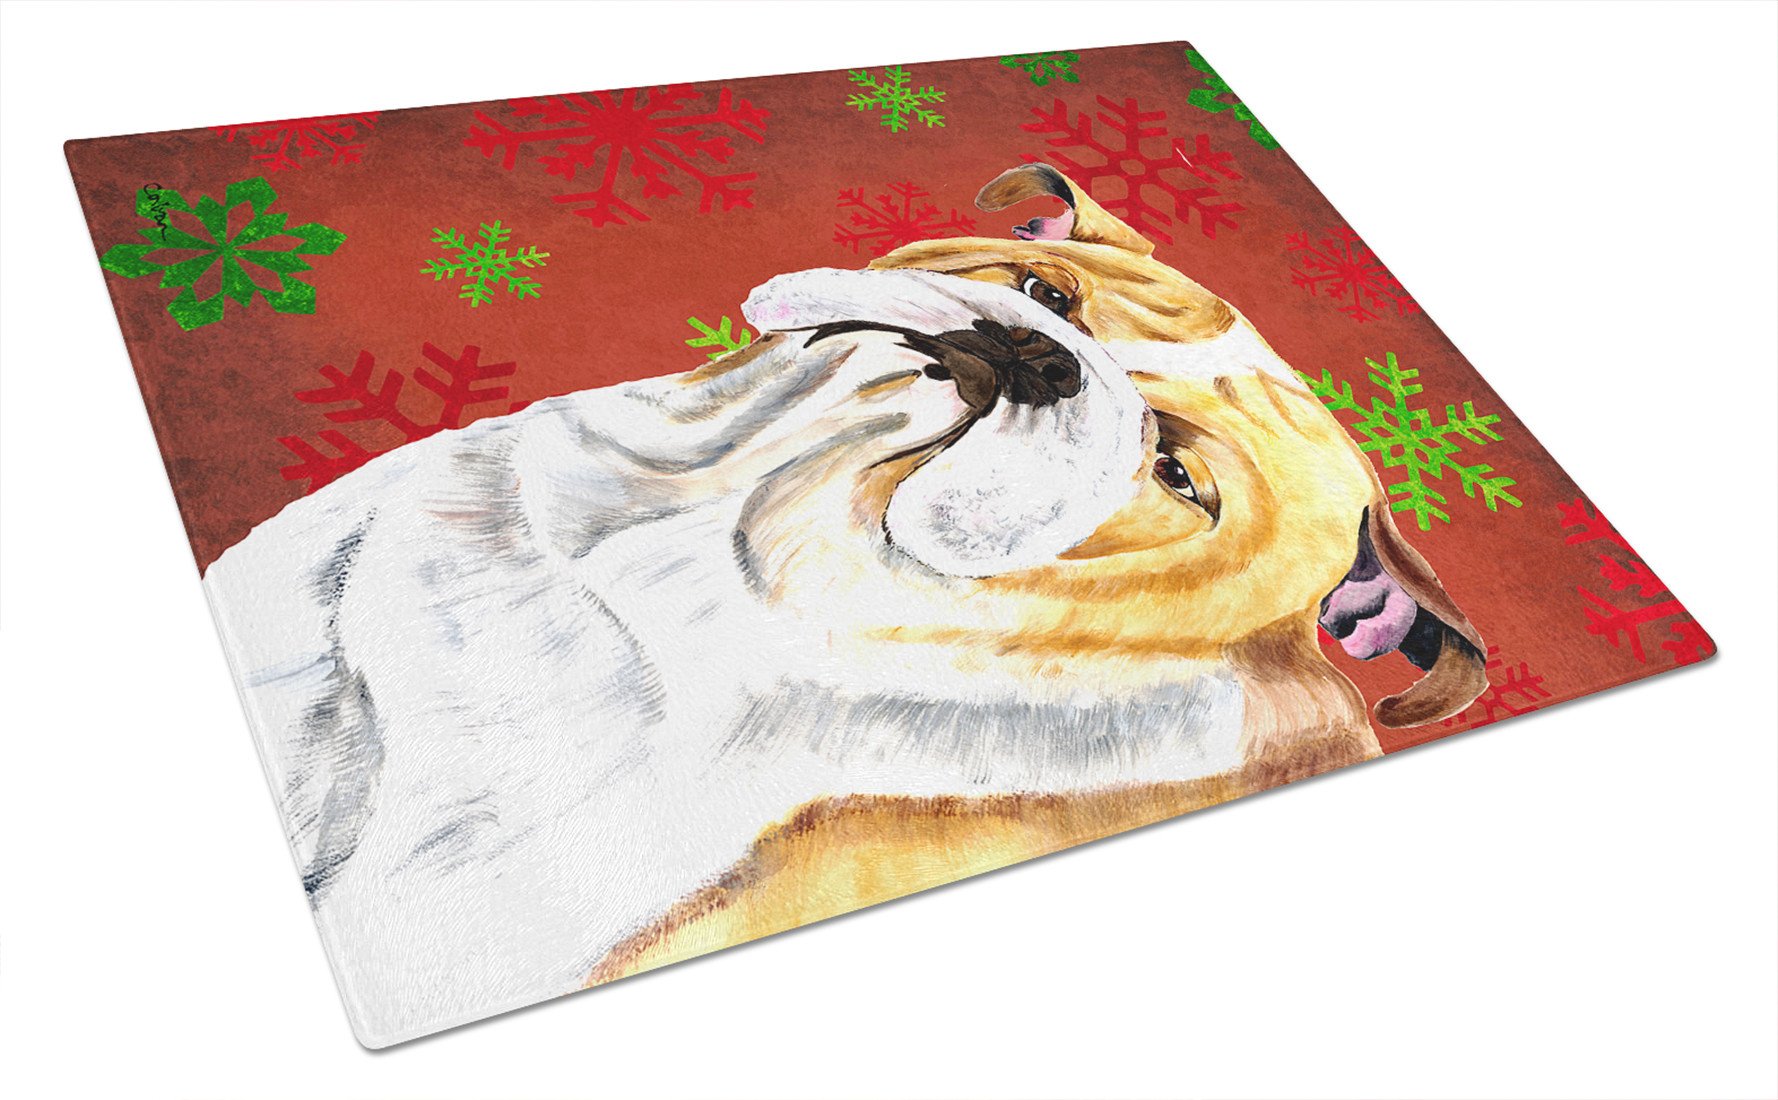 Bulldog English Red and Green Snowflakes Christmas Glass Cutting Board Large by Caroline's Treasures